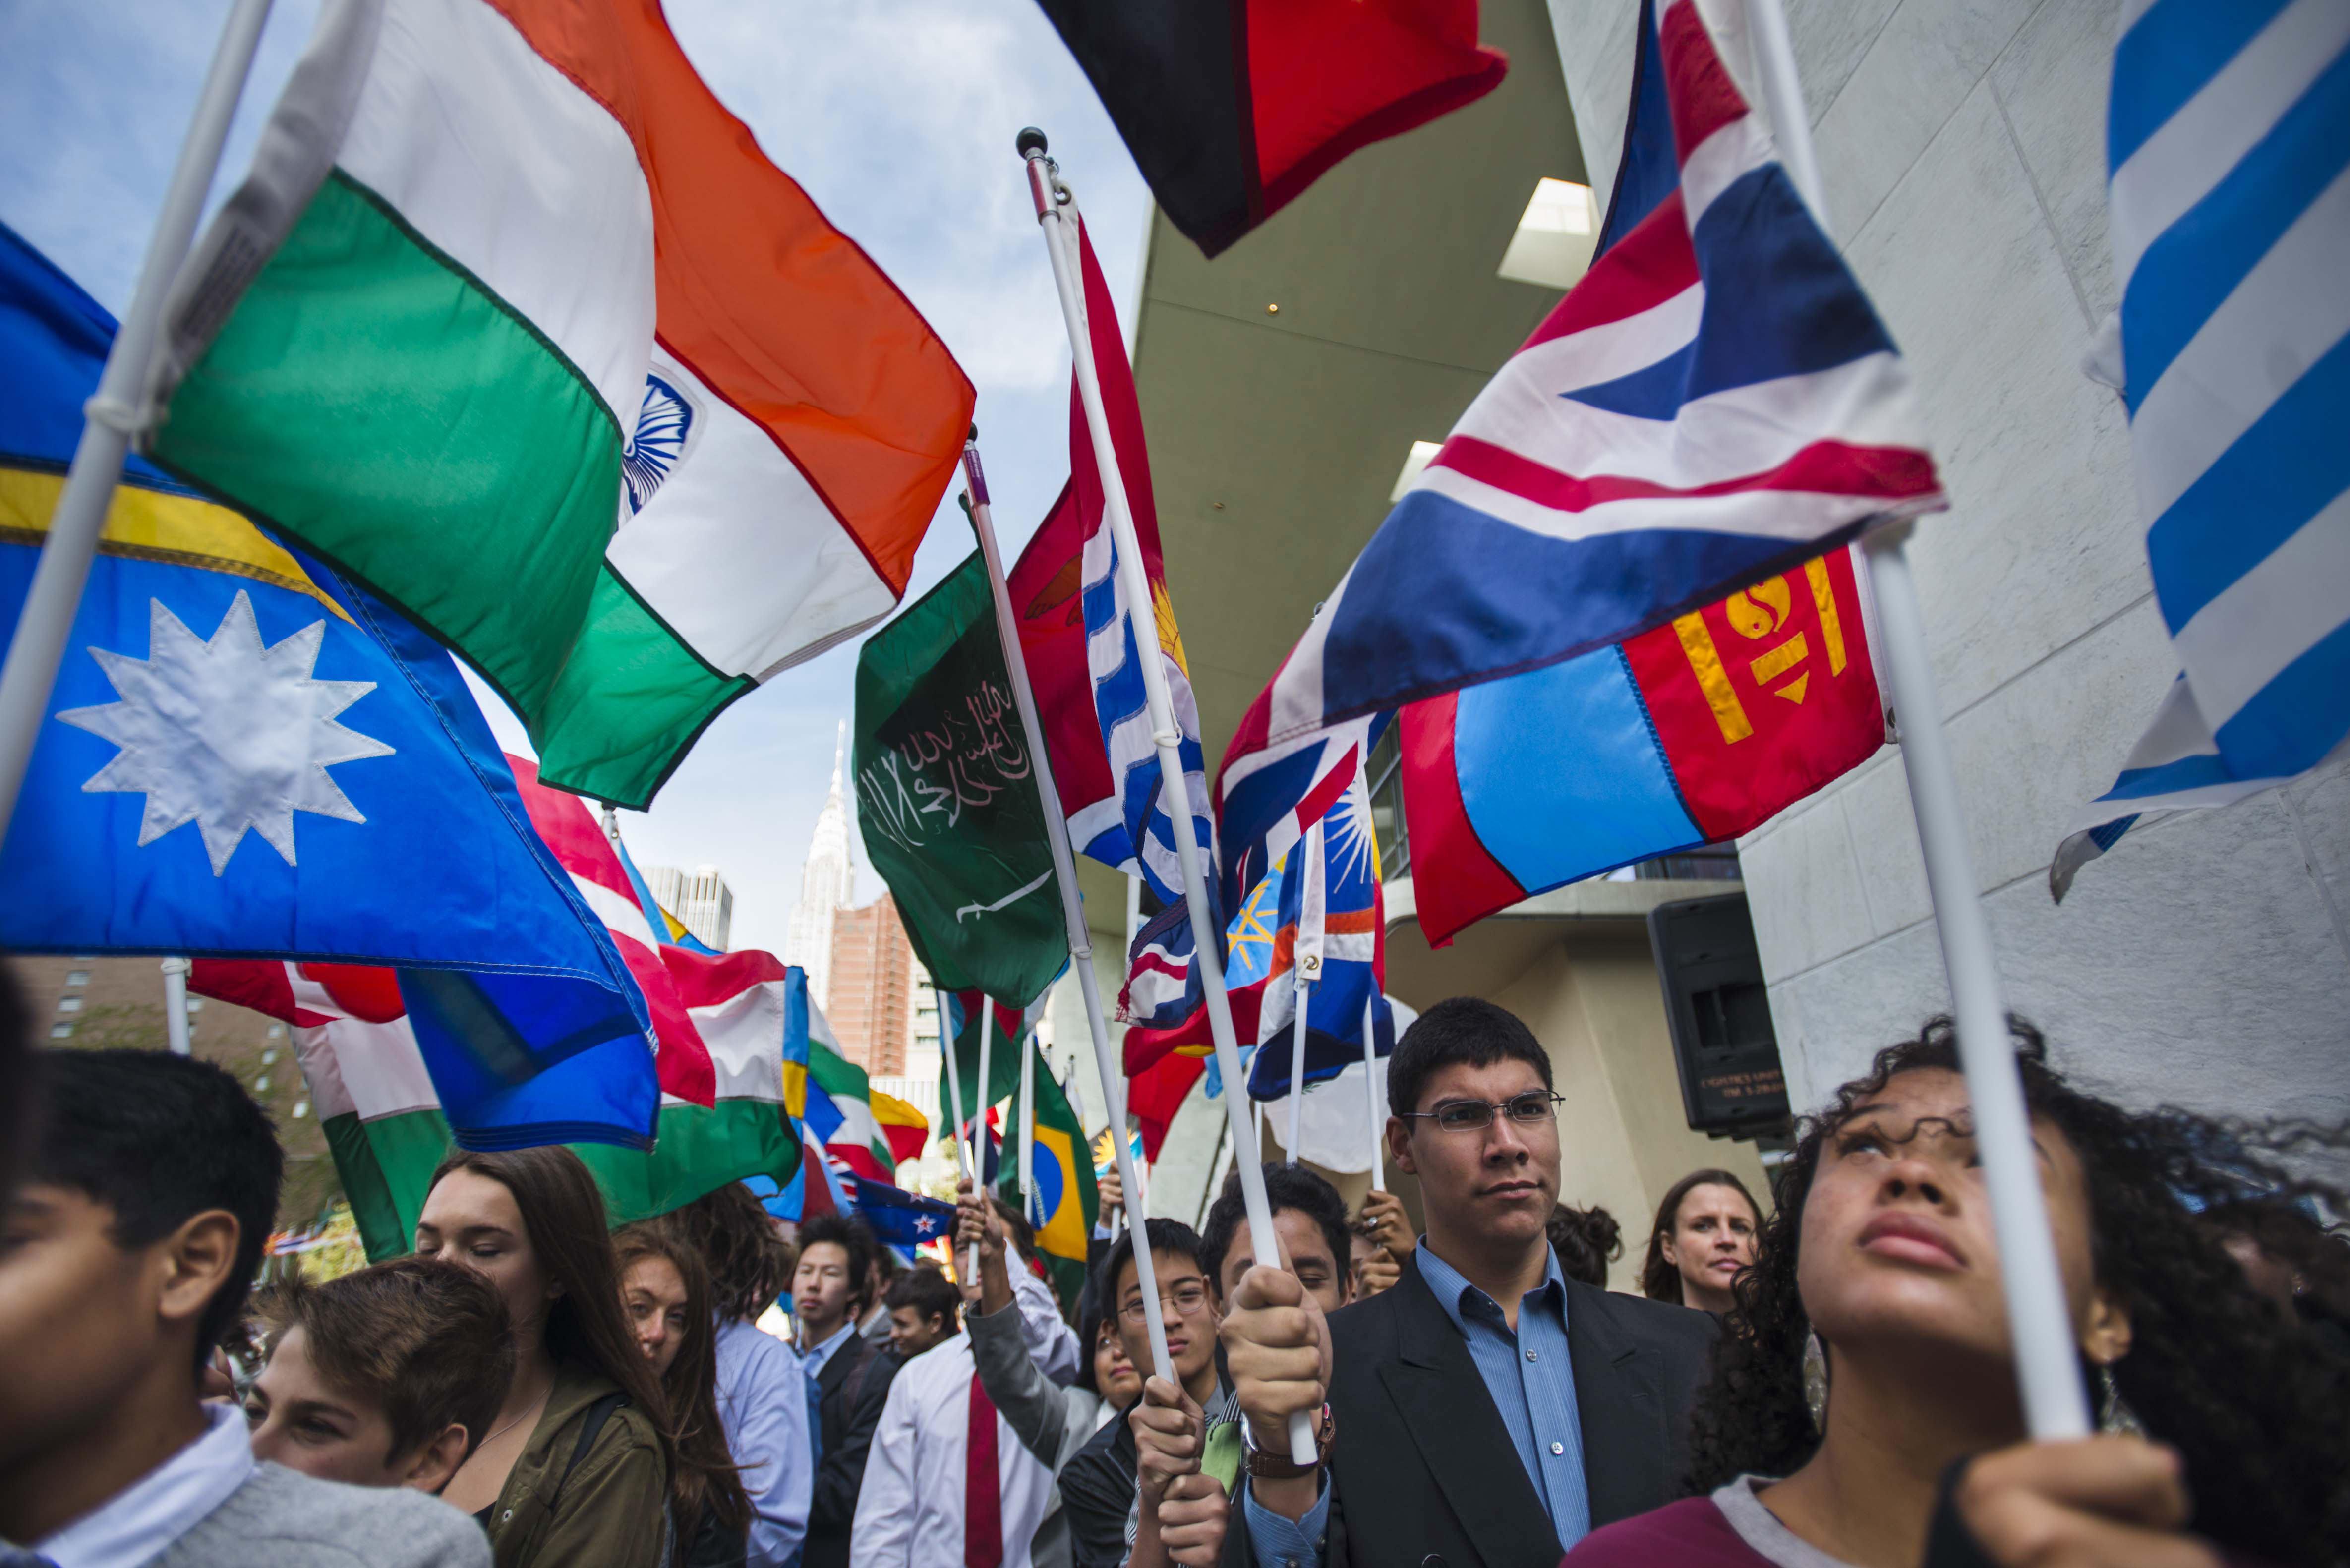 Students  carry  the  flags  of  United  Nations  Member  States  during  the  annual  Peace  Bell  Ceremony  held  in  observance  of  the  International  Day  of  Peace  (21  September),  ahead  of  the  70th  session  of  the  General  Assembly Photo: UN Photo/Amanda Voisard